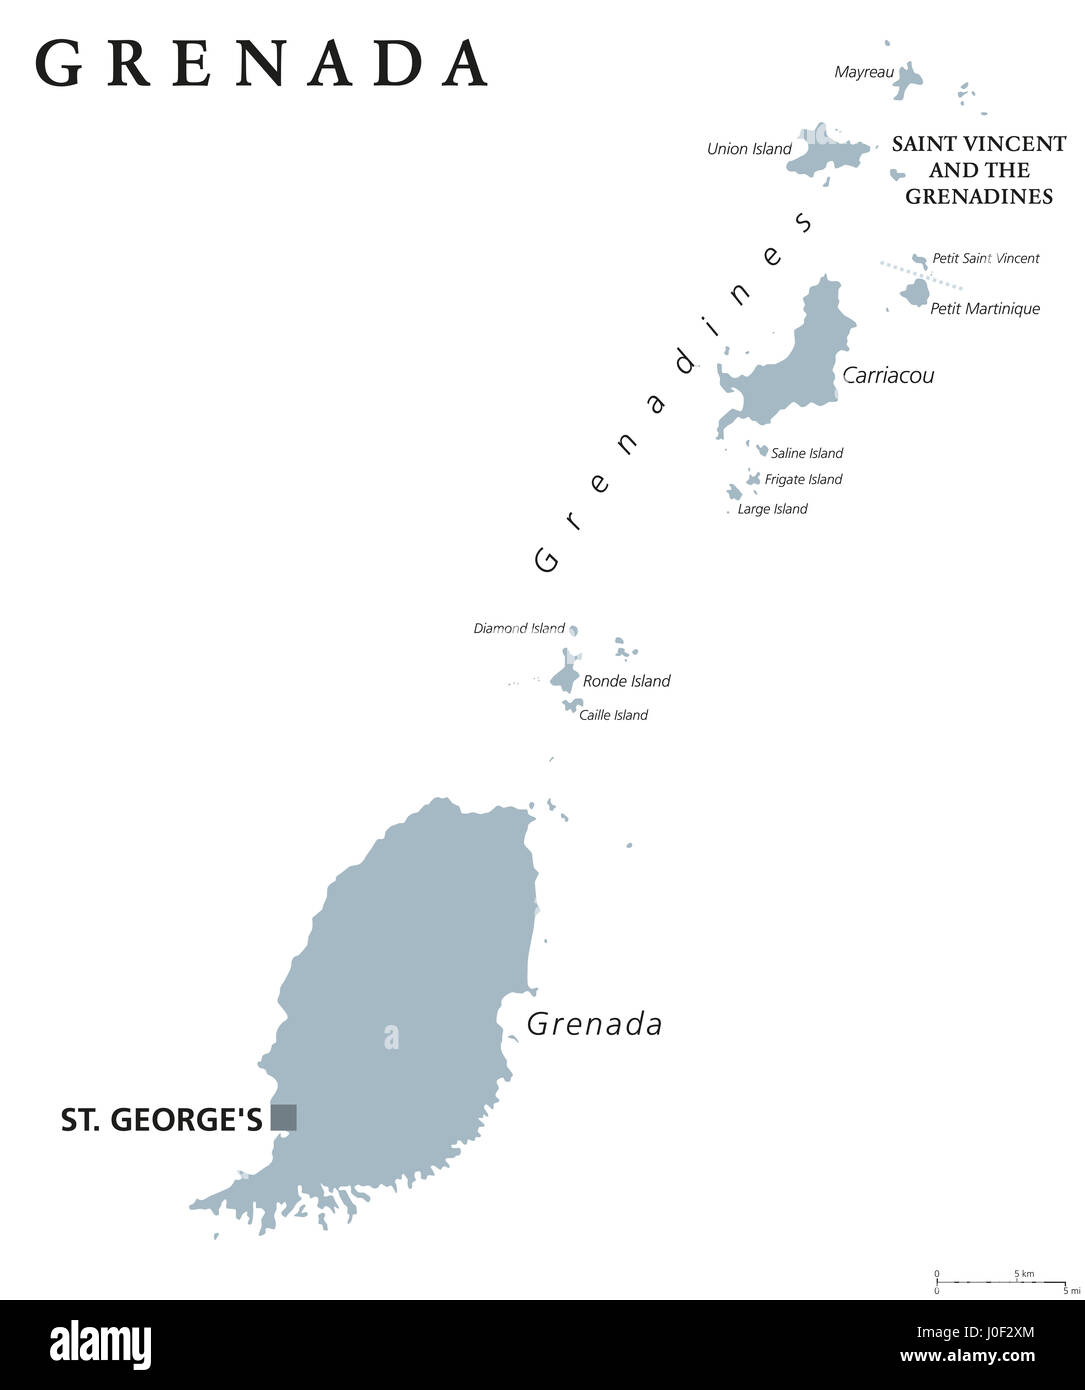 Grenada political map with capital St George's. Caribbean islands country and part of the Lesser Antilles and Windward Islands. Gray illustration. Stock Photo